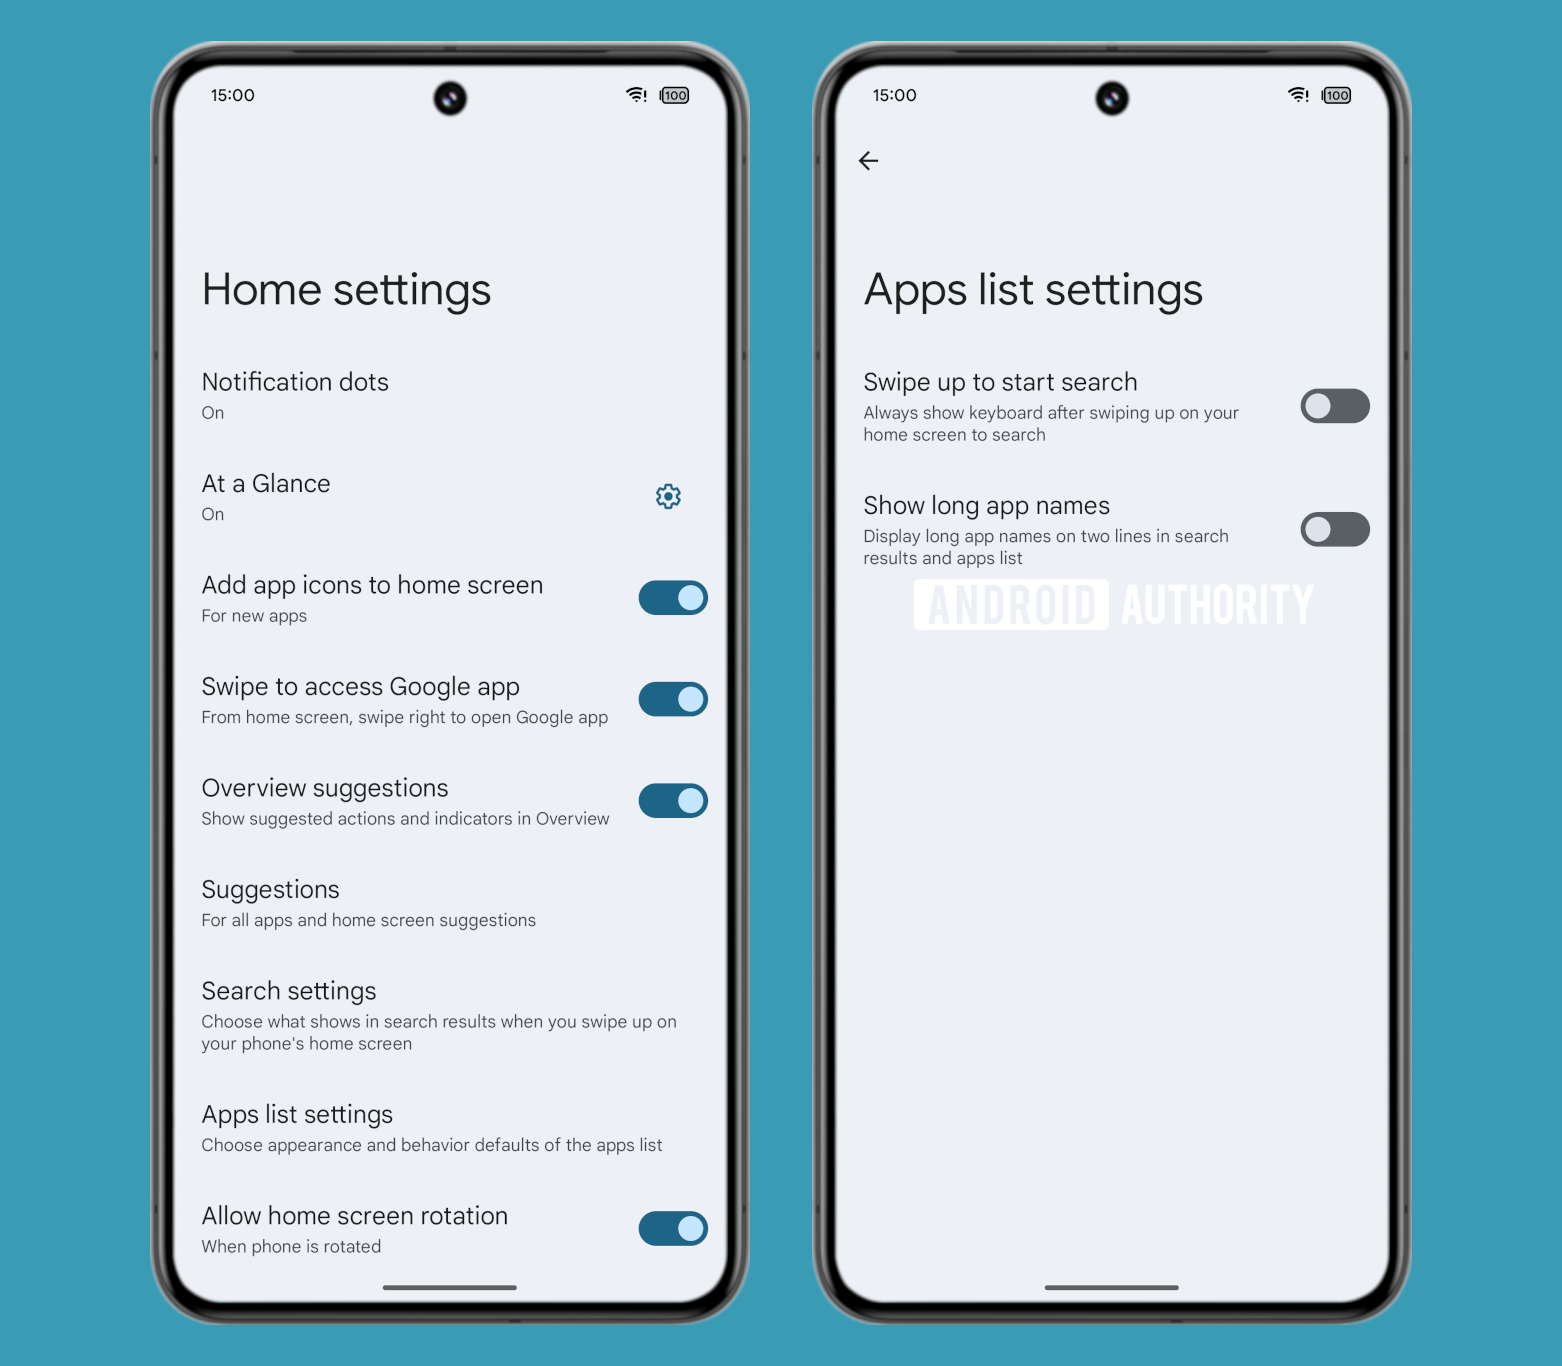 Android 15 Pixel Launcher apps list settings